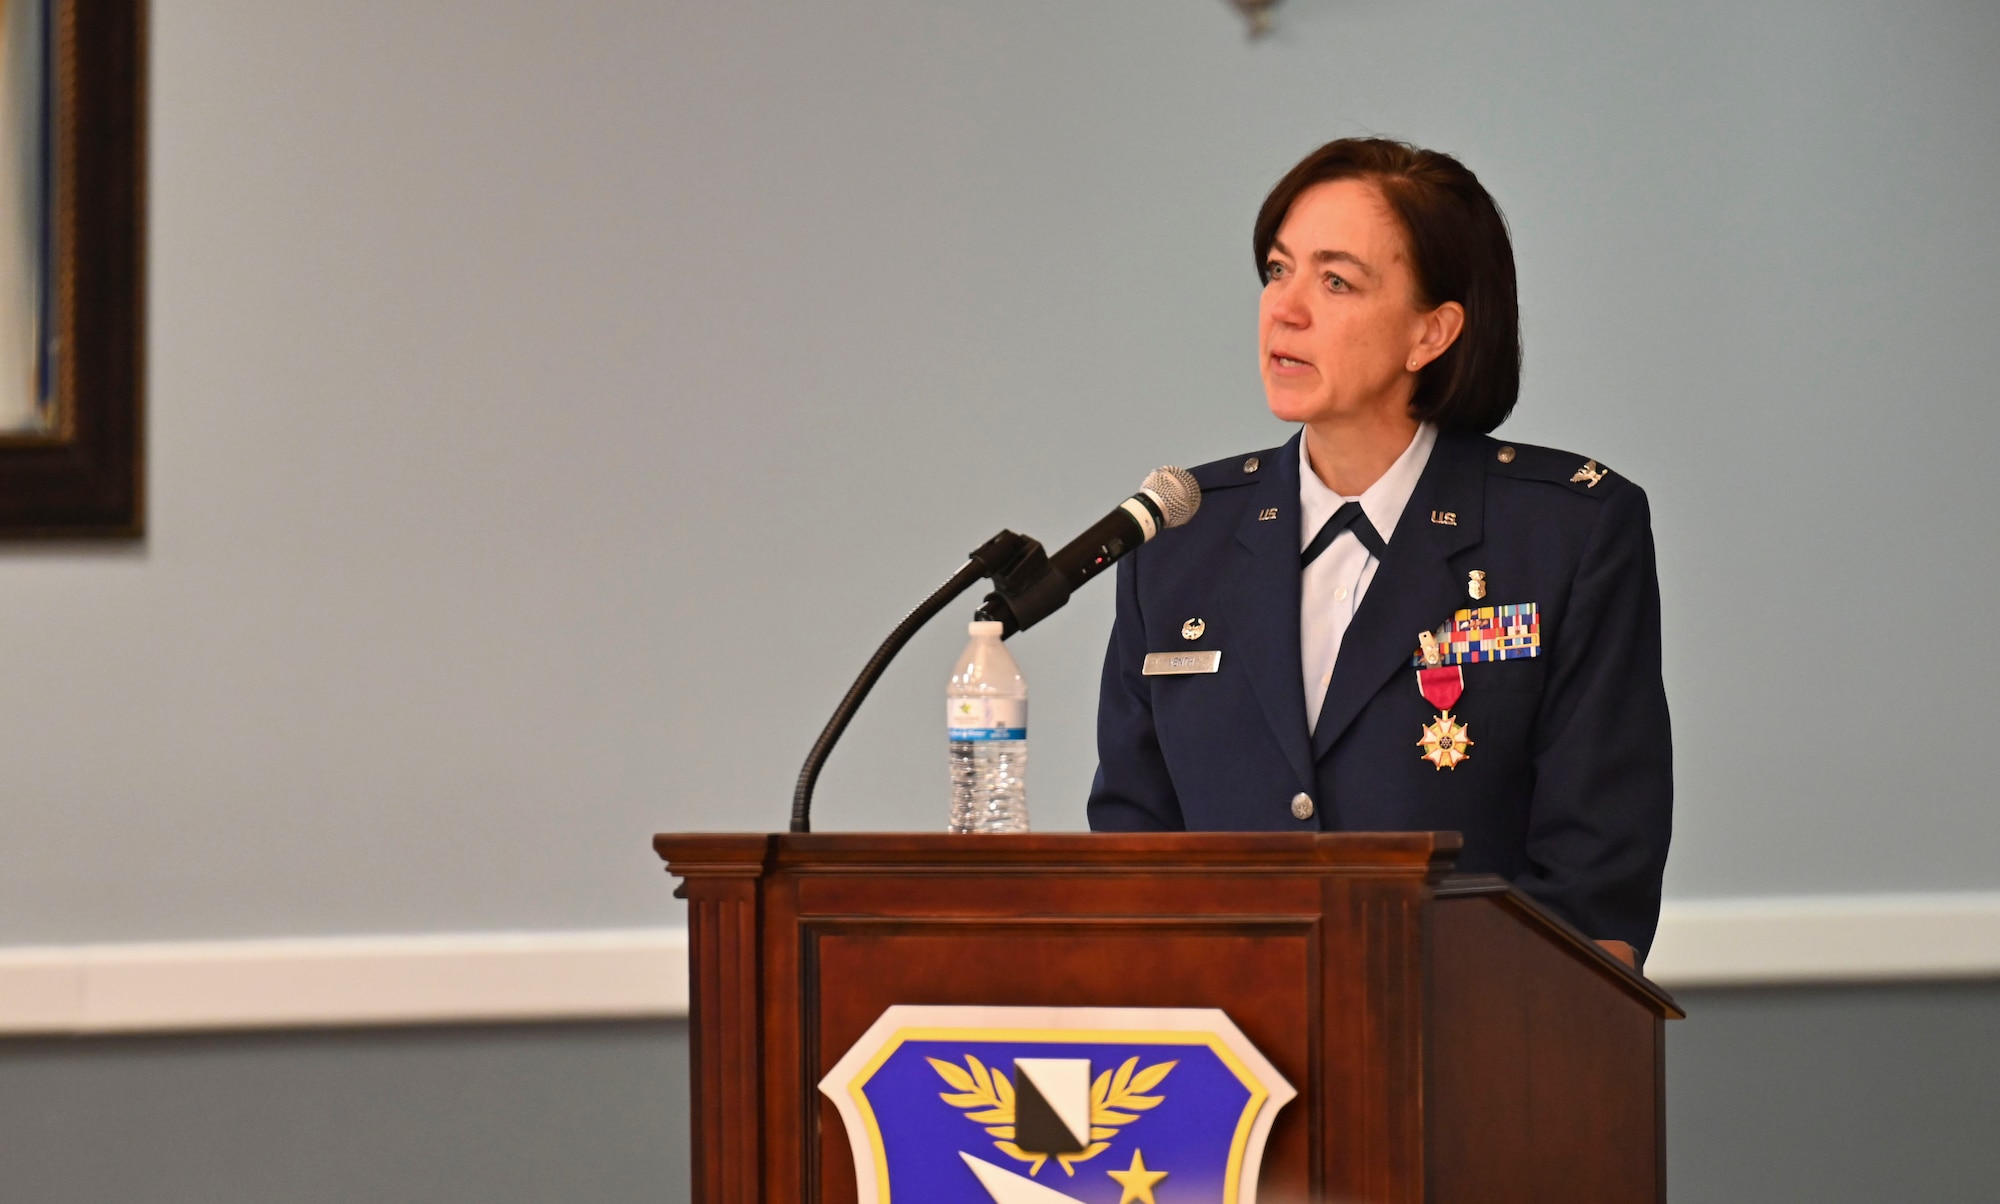 U.S. Air Force Col. Betty Venth, out-going 14th Medical Group commander, speaks to attendees at the 14th Medical Group Change of Command Ceremony, July 6, 2021, on Columbus Air Force Base, Miss. Venth led the Air Education and Training commands number one COVID-19 vaccination use rate, while battling a public health emergency. (U.S. Air Force photo by Airman 1st Class Jessica Haynie)